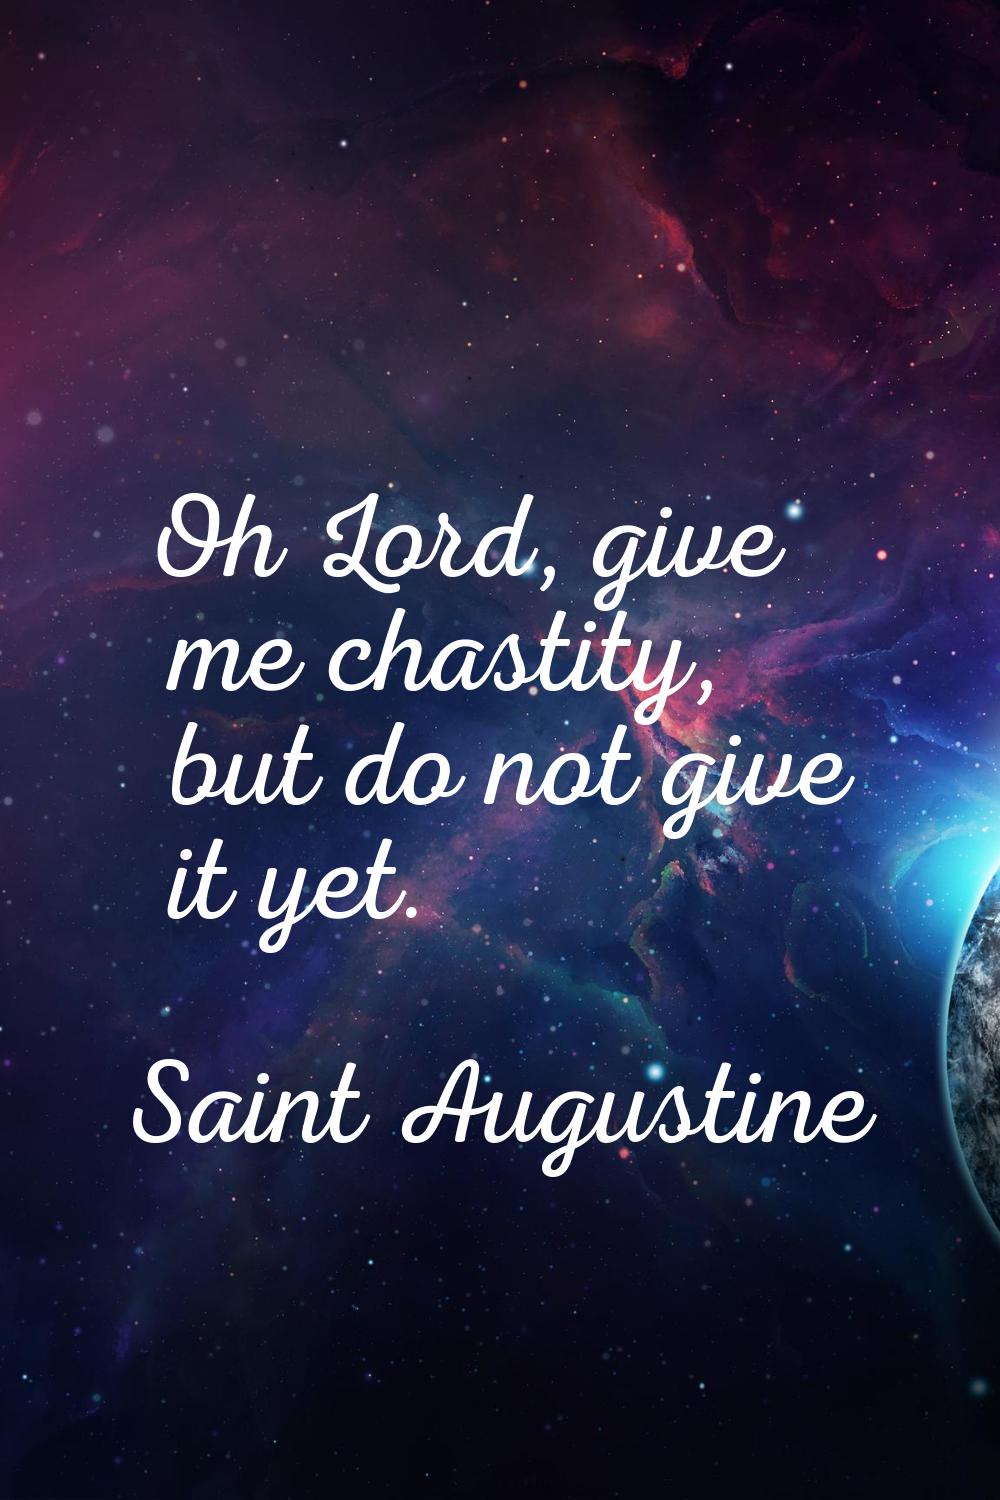 Oh Lord, give me chastity, but do not give it yet.